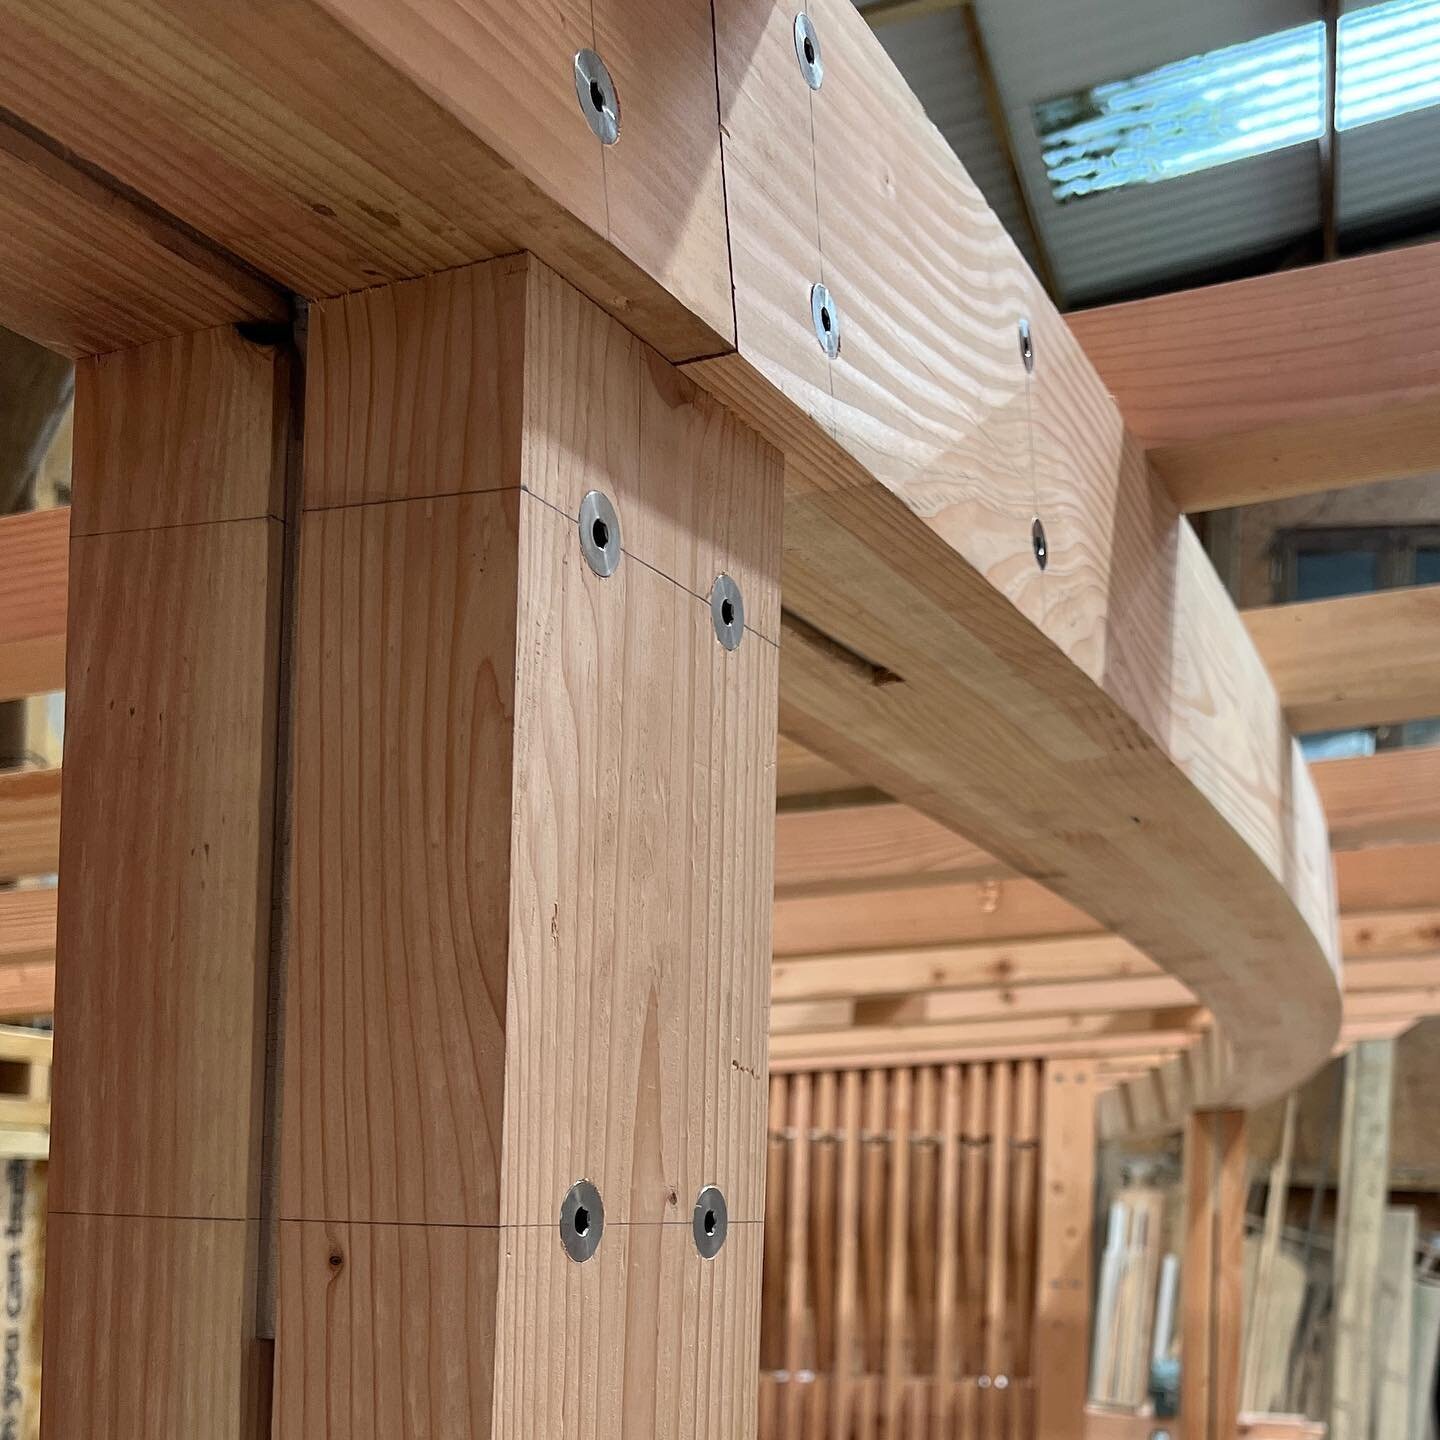 Our next project taking shape in the workshop&hellip;

#douglasfir
#glulam
#timberarchitecture
#gardenstructure 
#timberengineering 
#timberframestructure